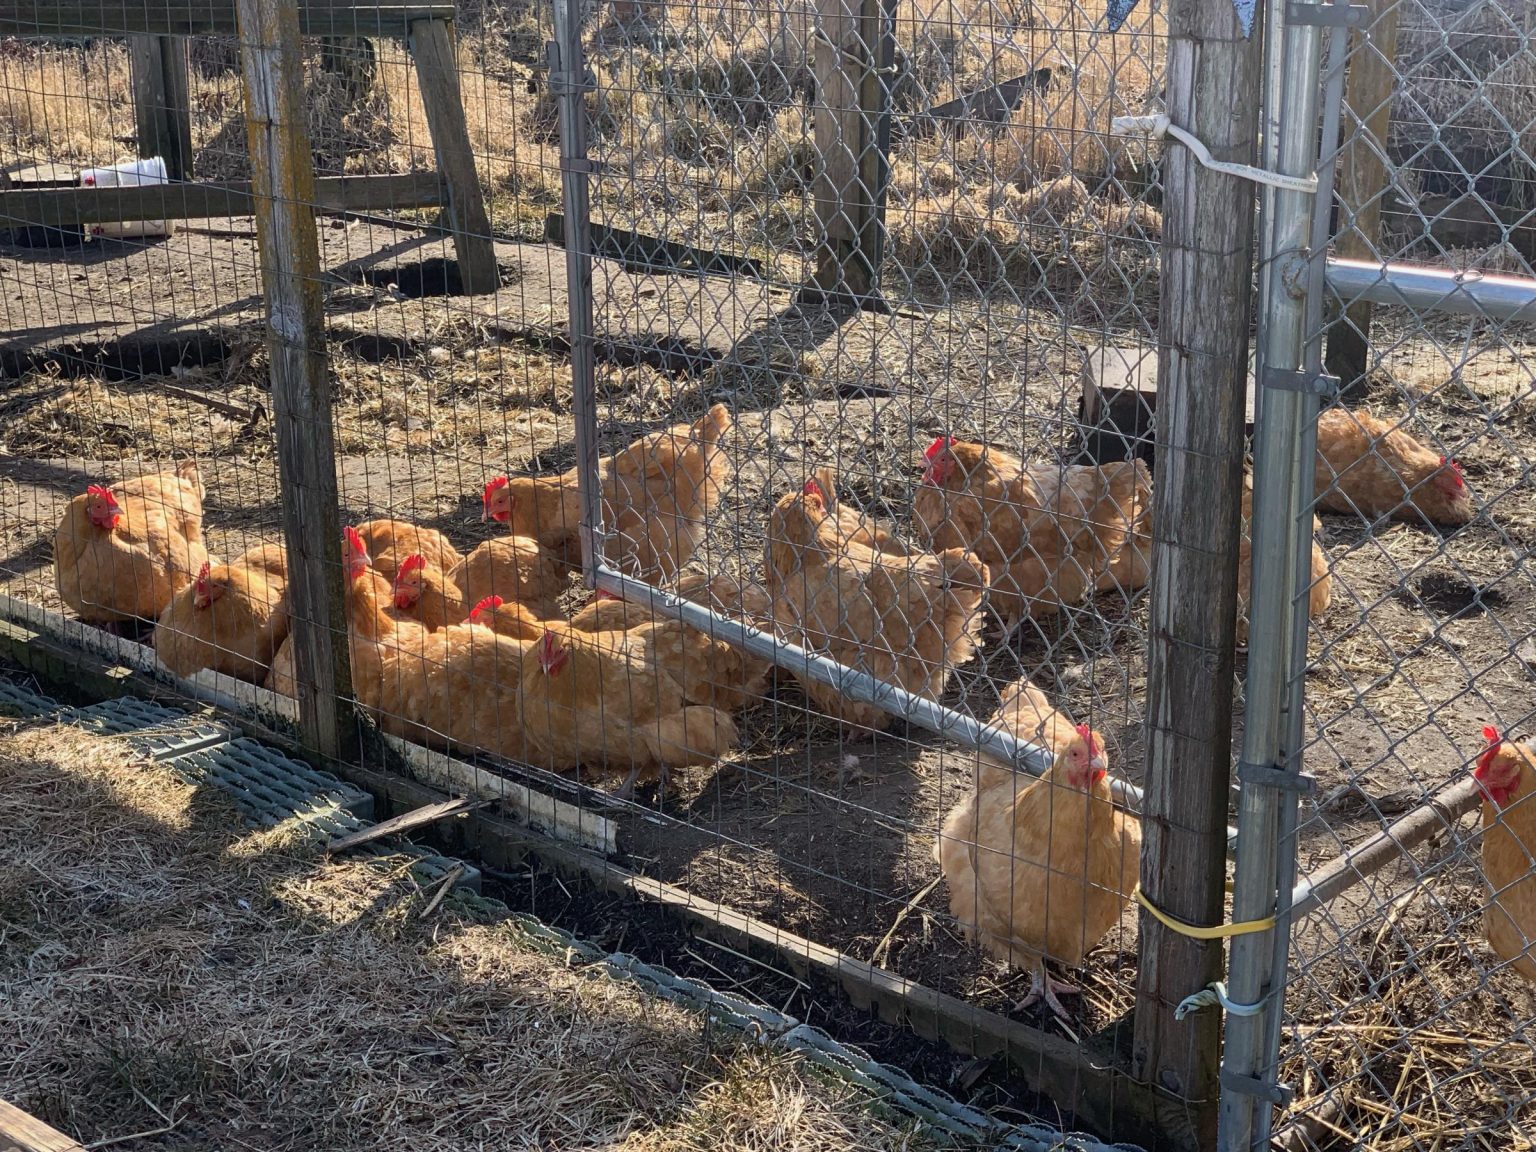 A dozen or so chickens in a coop in Bethel